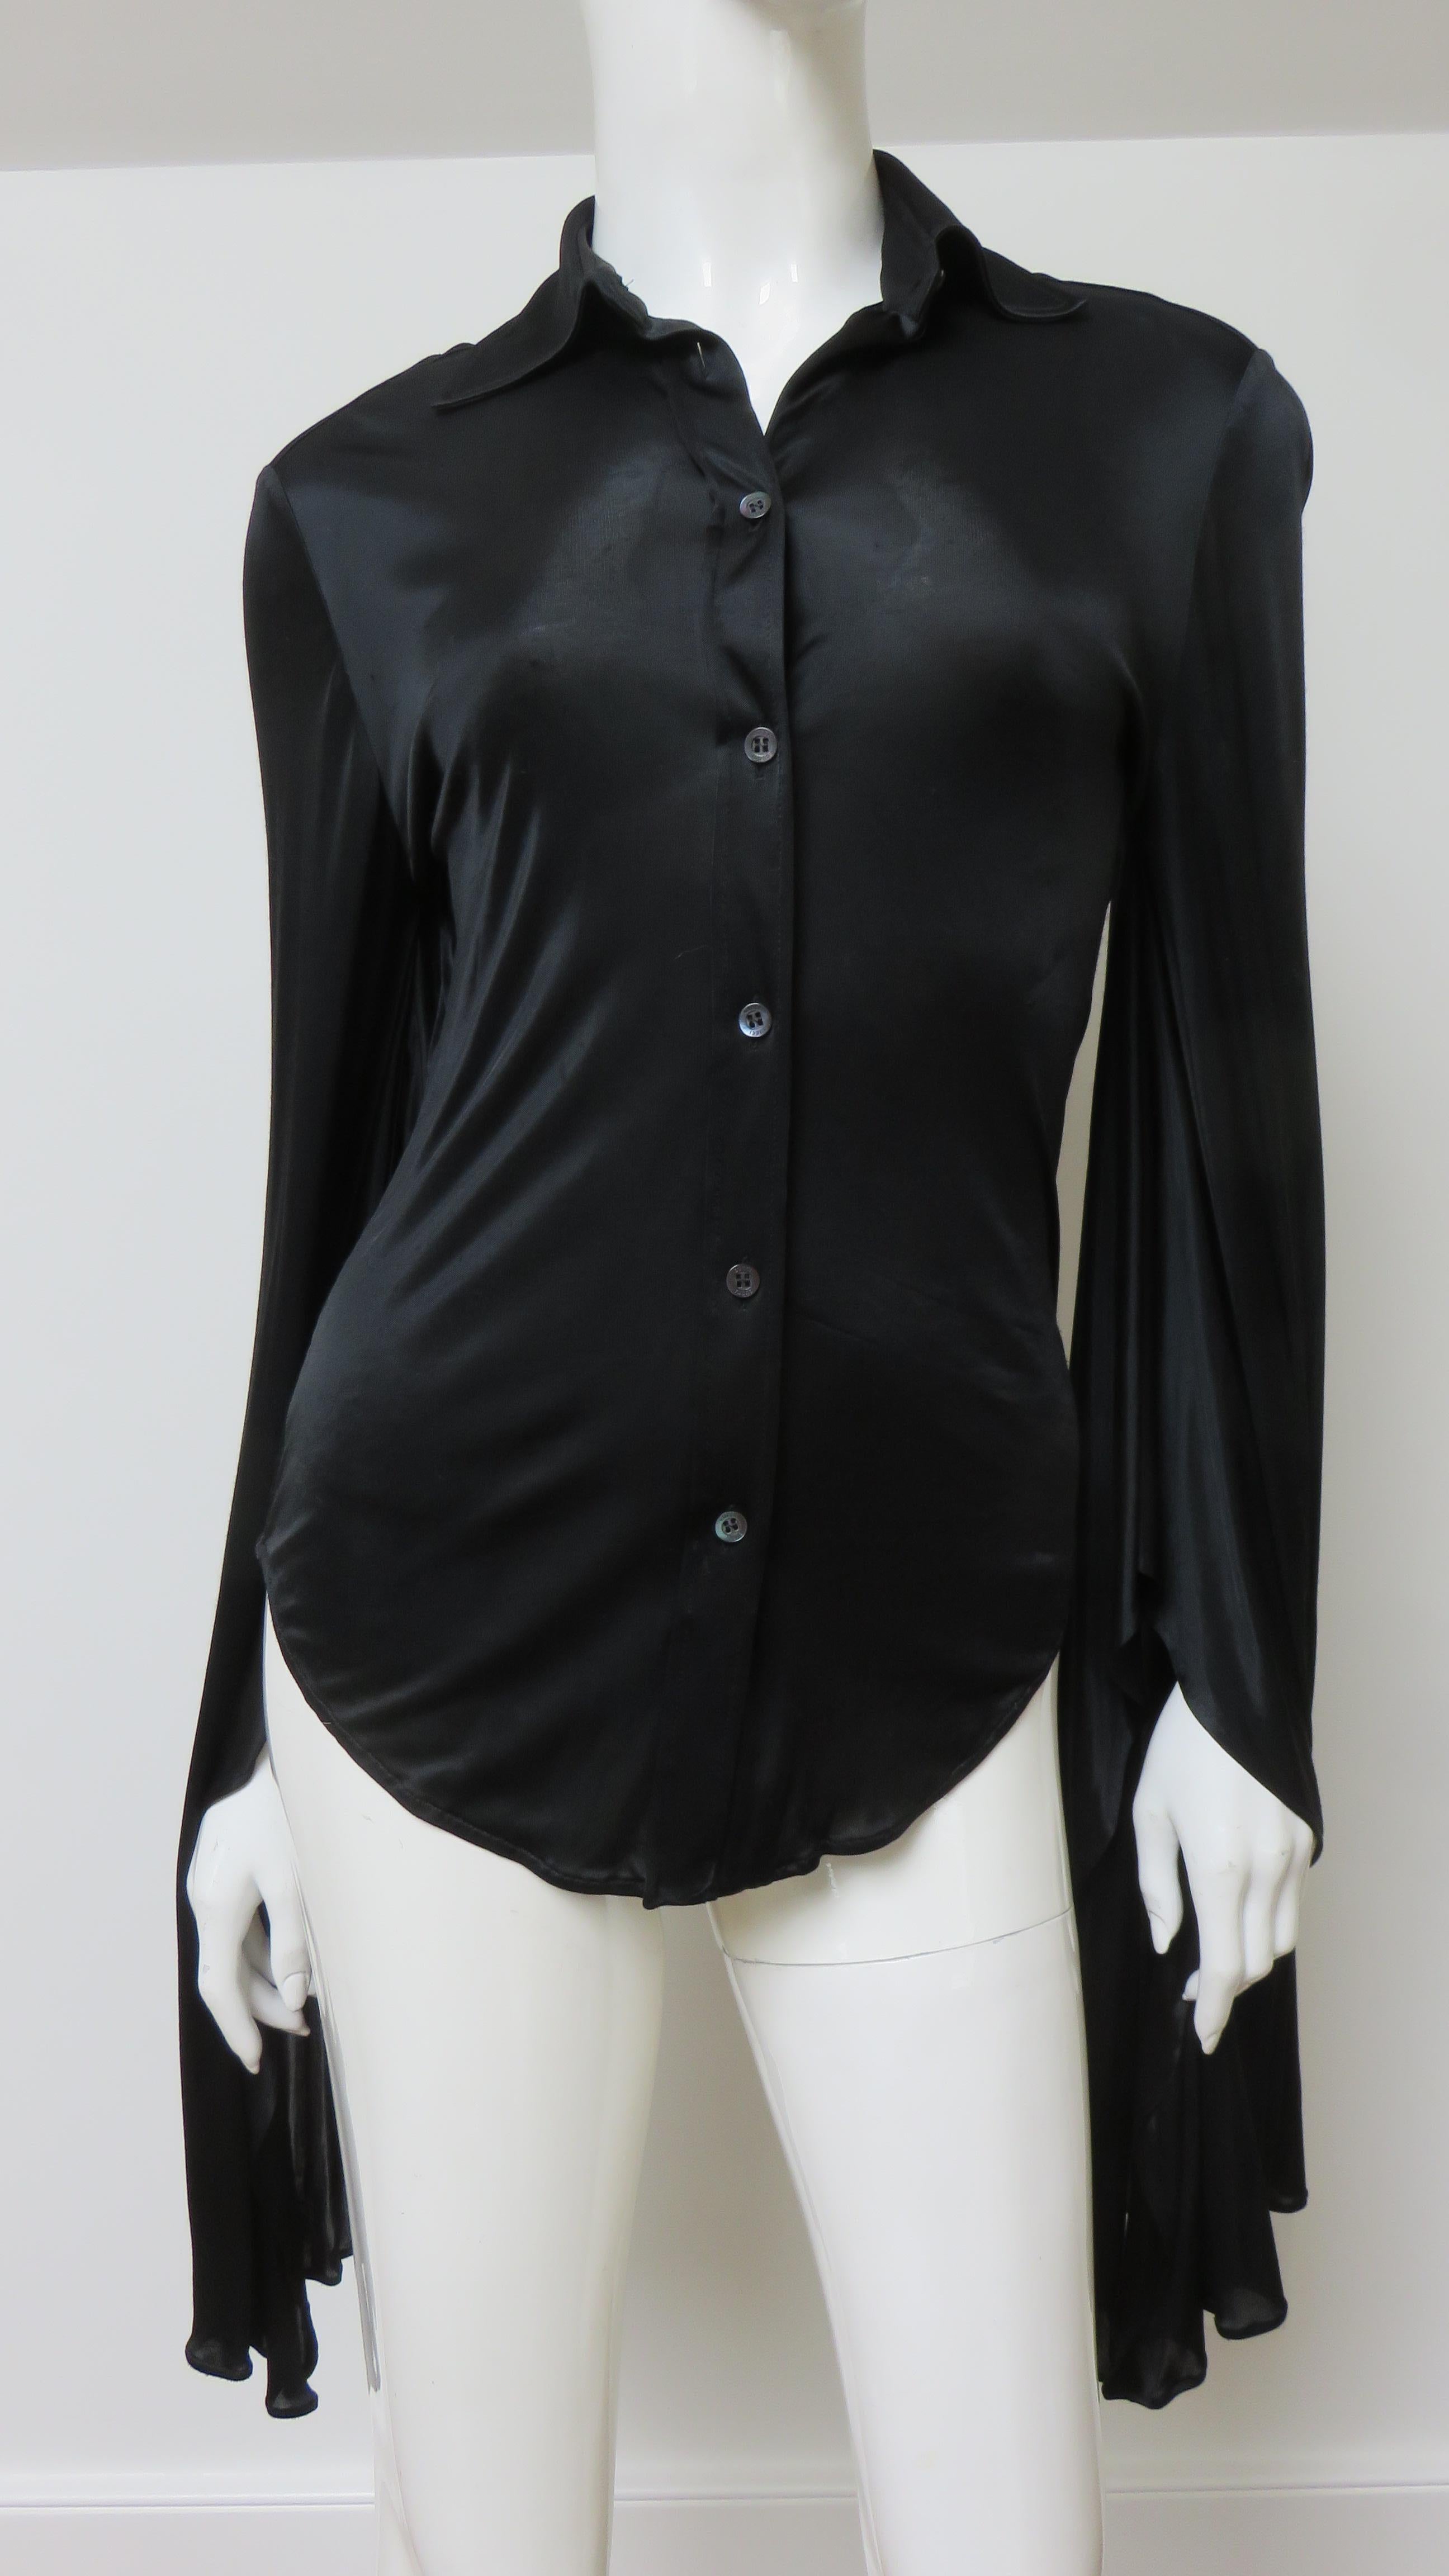 Tom Ford for Gucci Angel Sleeve Silk Shirt S/S 2004 In Good Condition For Sale In Water Mill, NY